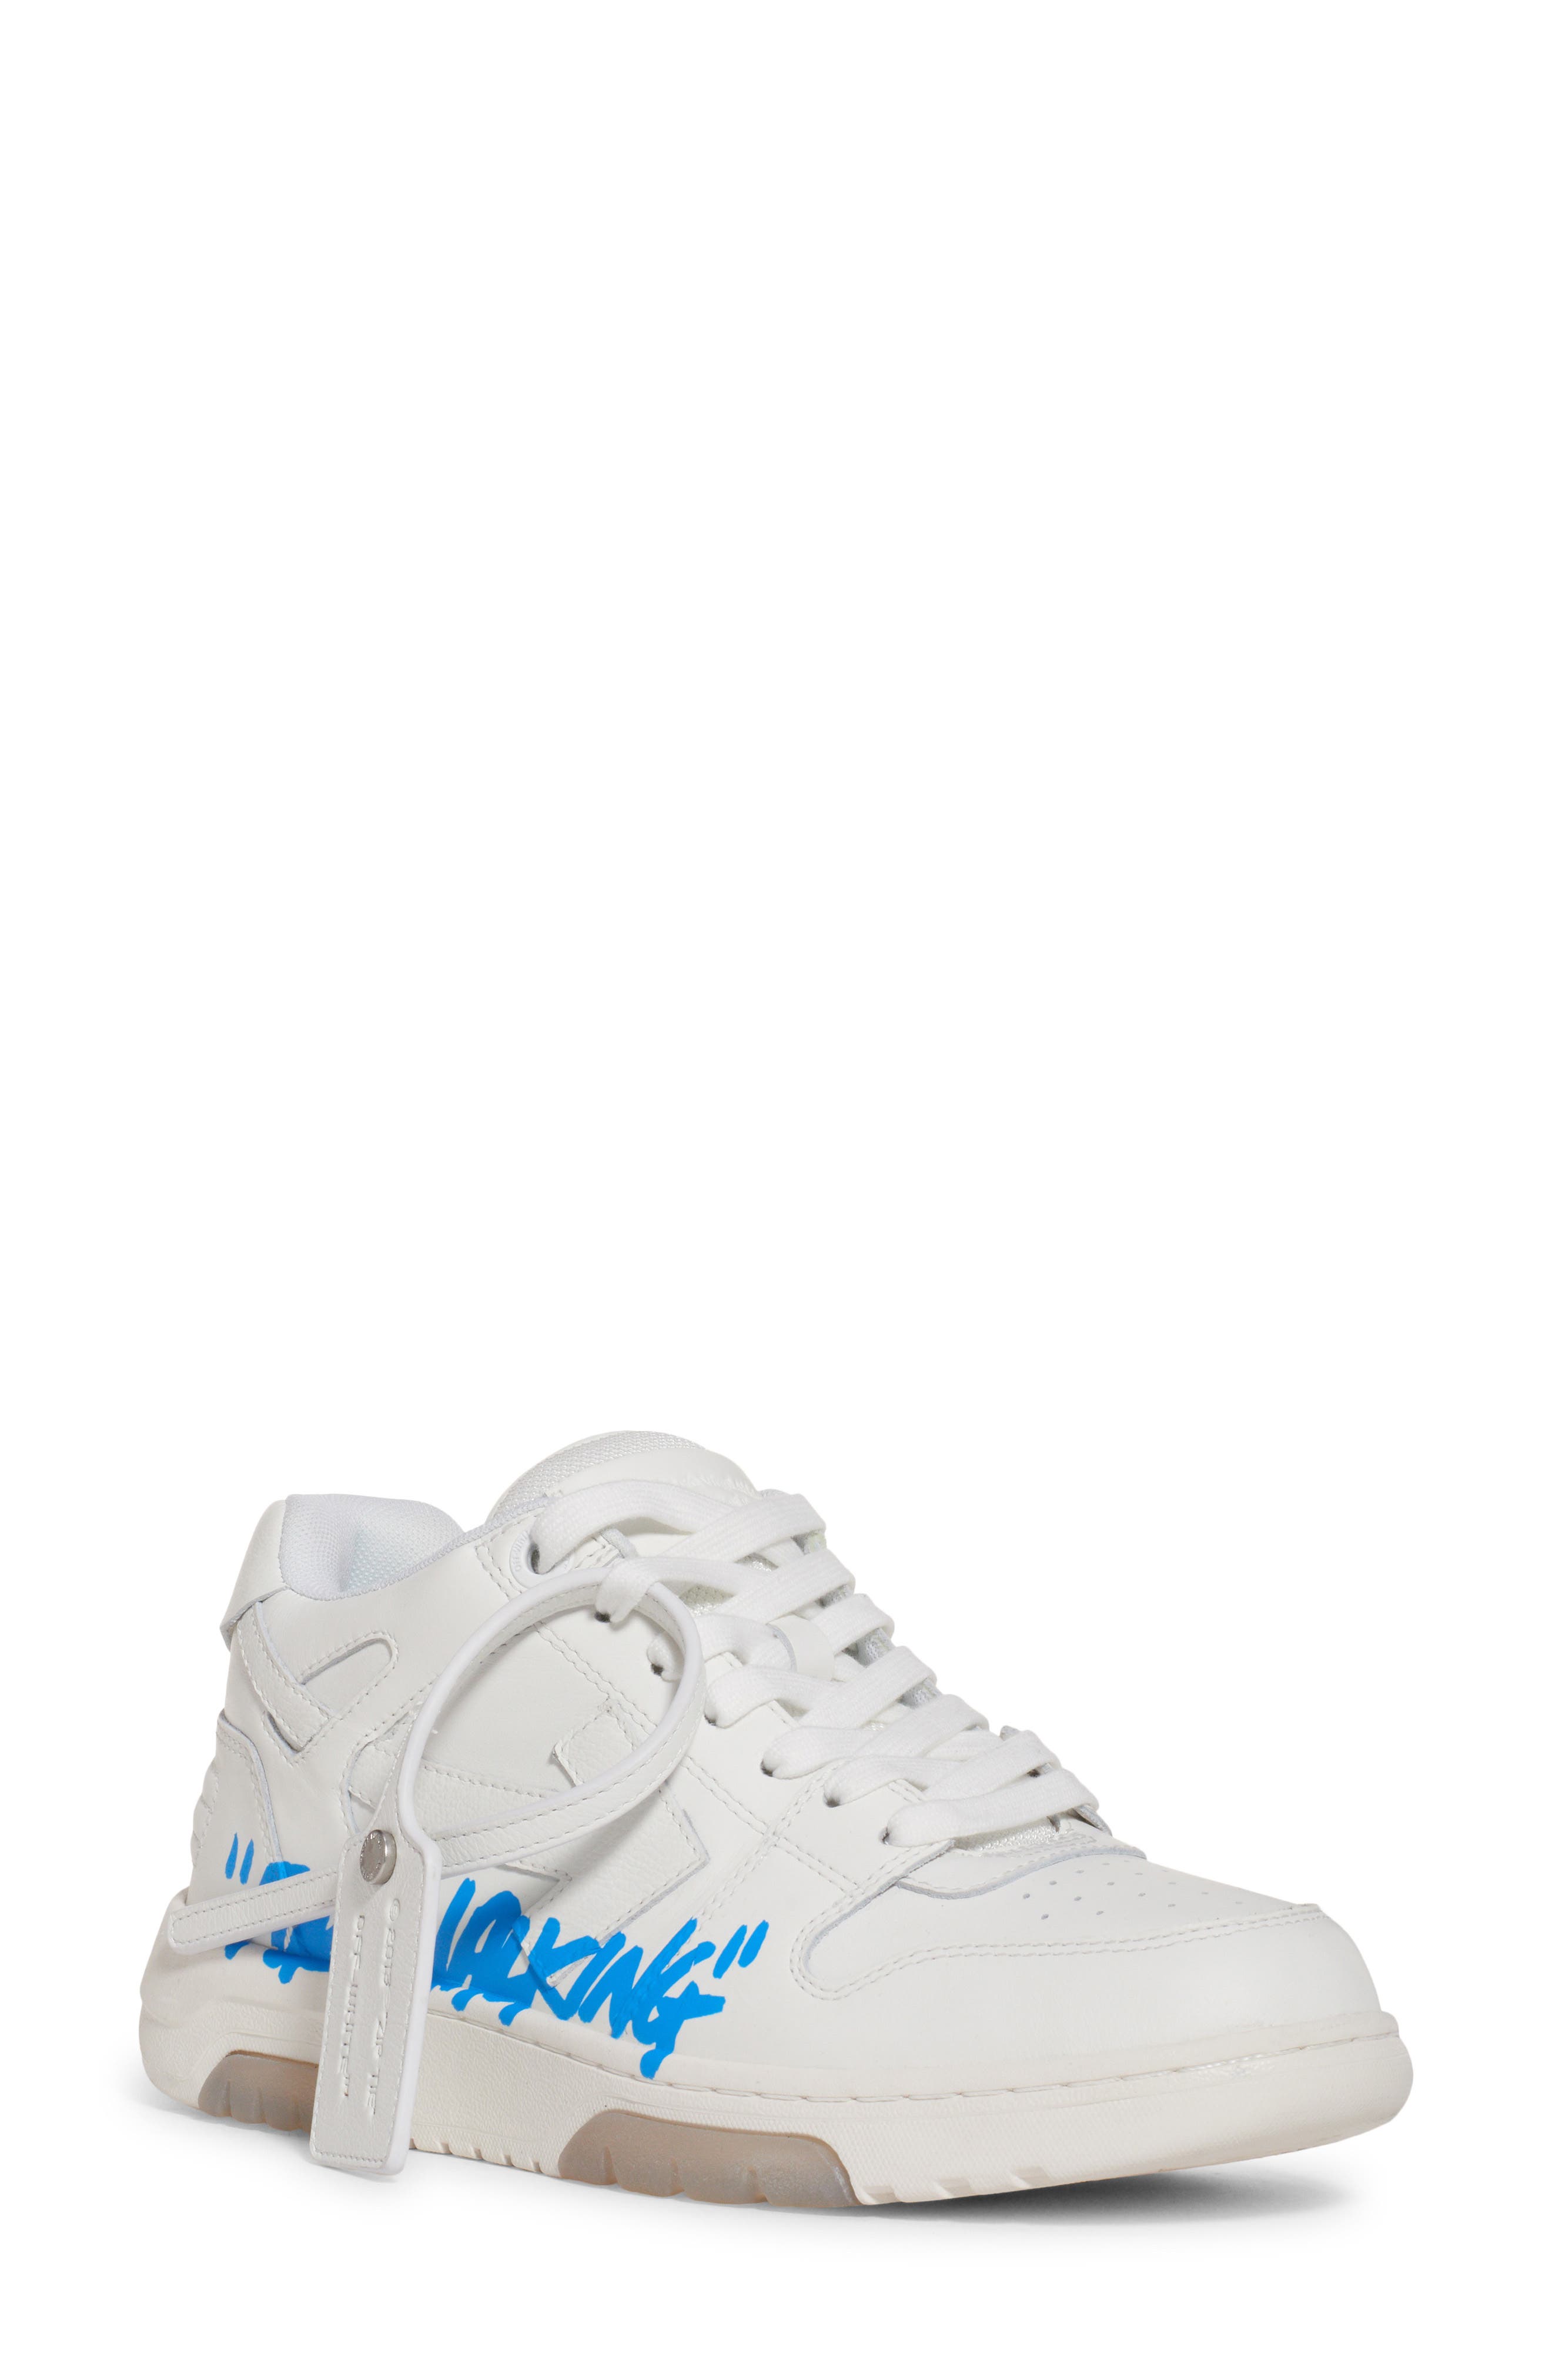 for walking sneakers off white